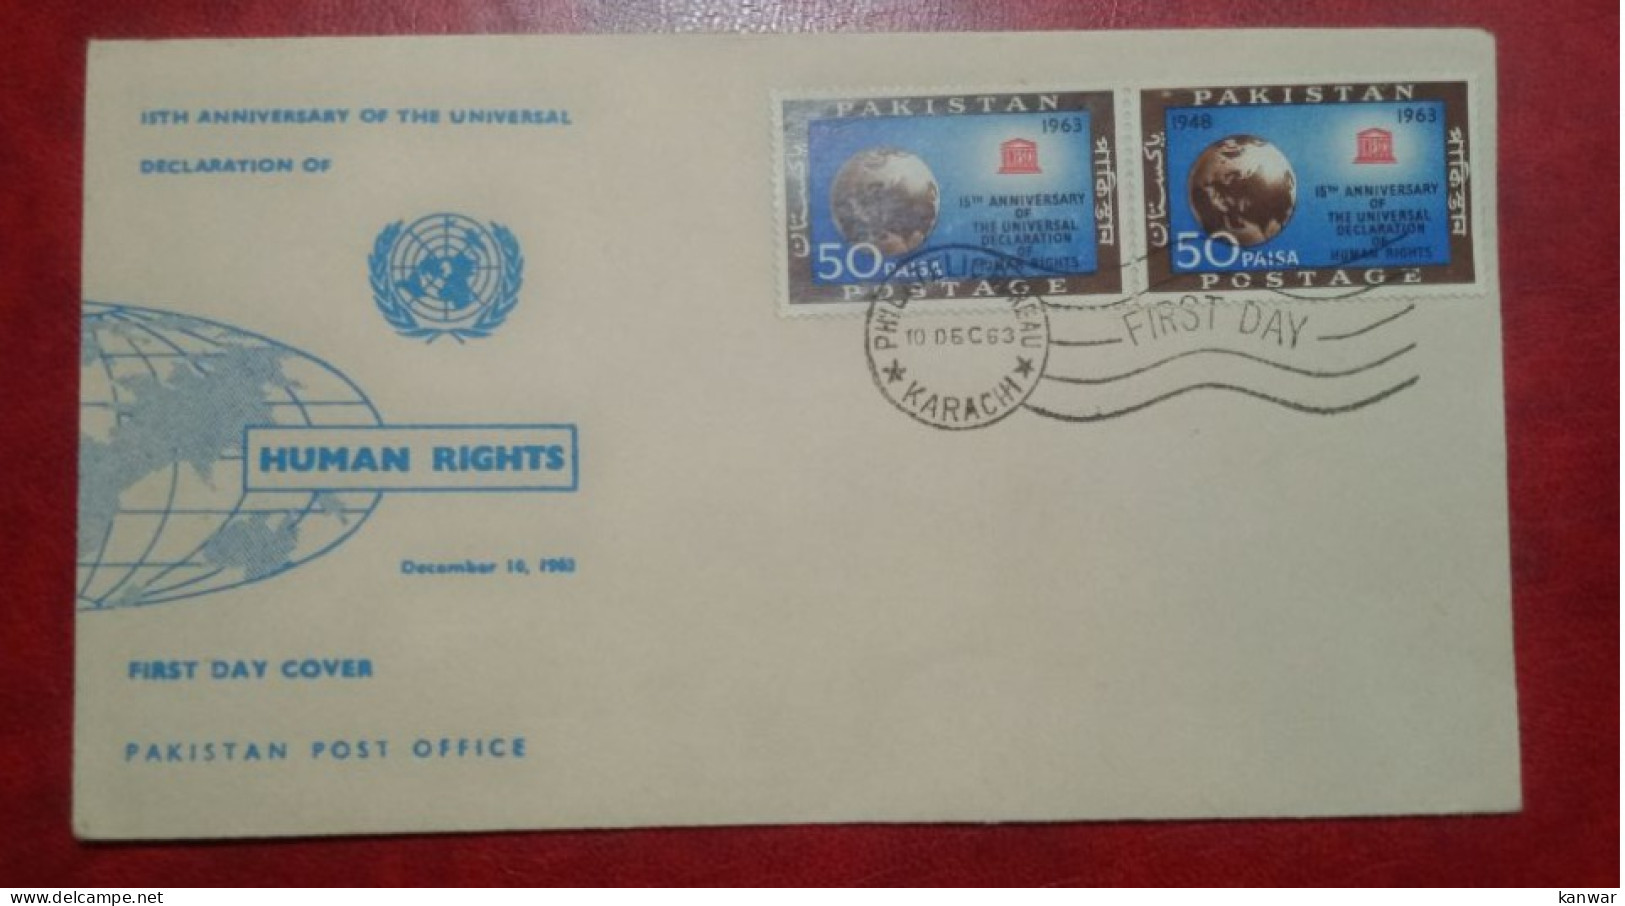 1963 PAKISTAN FDC COVER WITH STAMPS 15TH ANNIVERSARY OF THE UNIVERSAL DECLERATION OF HUMAN RIGHTS - Pakistan